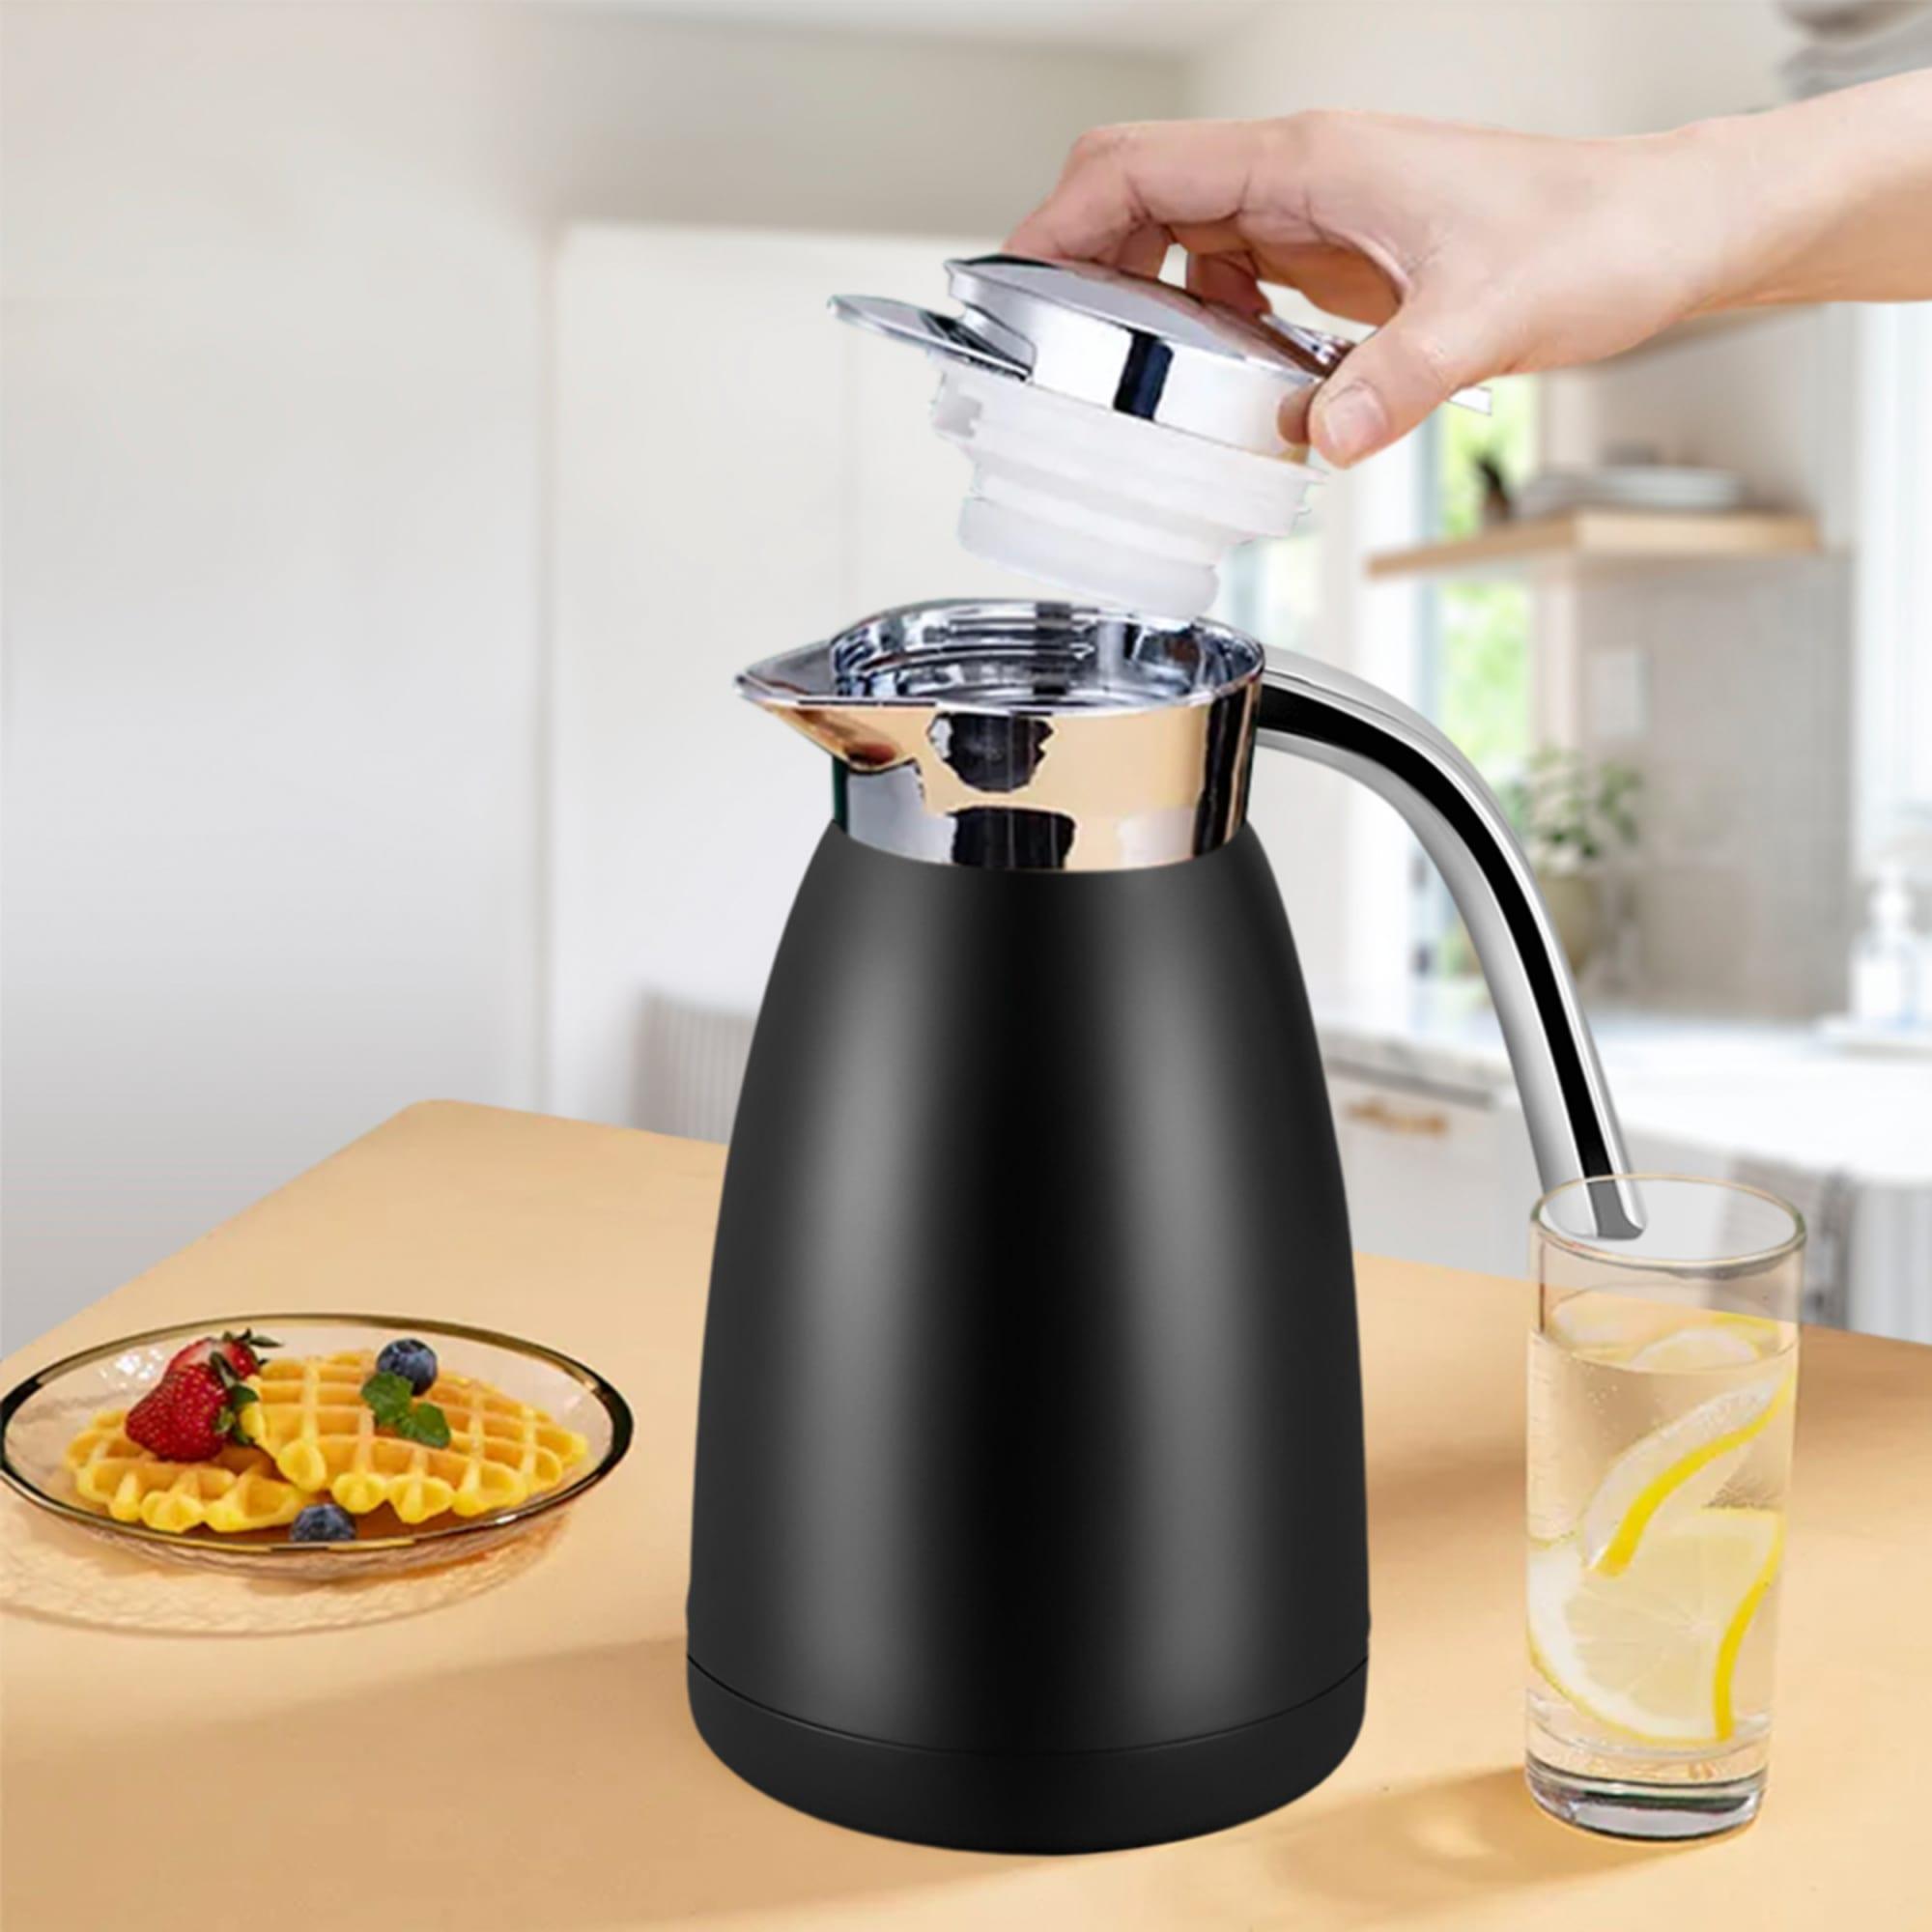 Soga Stainless Steel Insulated Kettle 1.2L Black Image 4